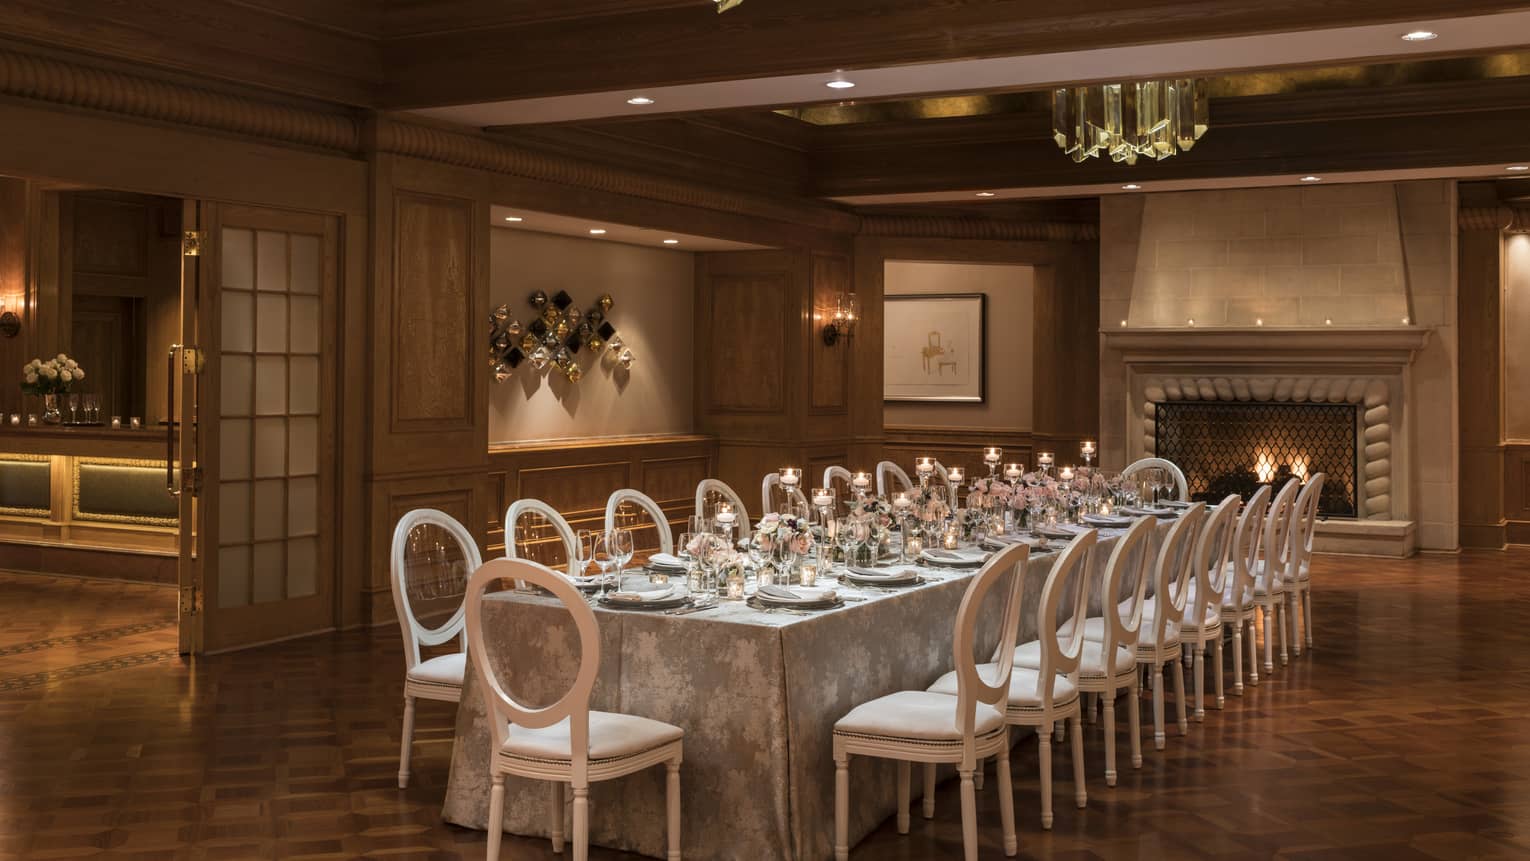 Savannah Hall banquet room with long private dining table, candles under modern crystal lights